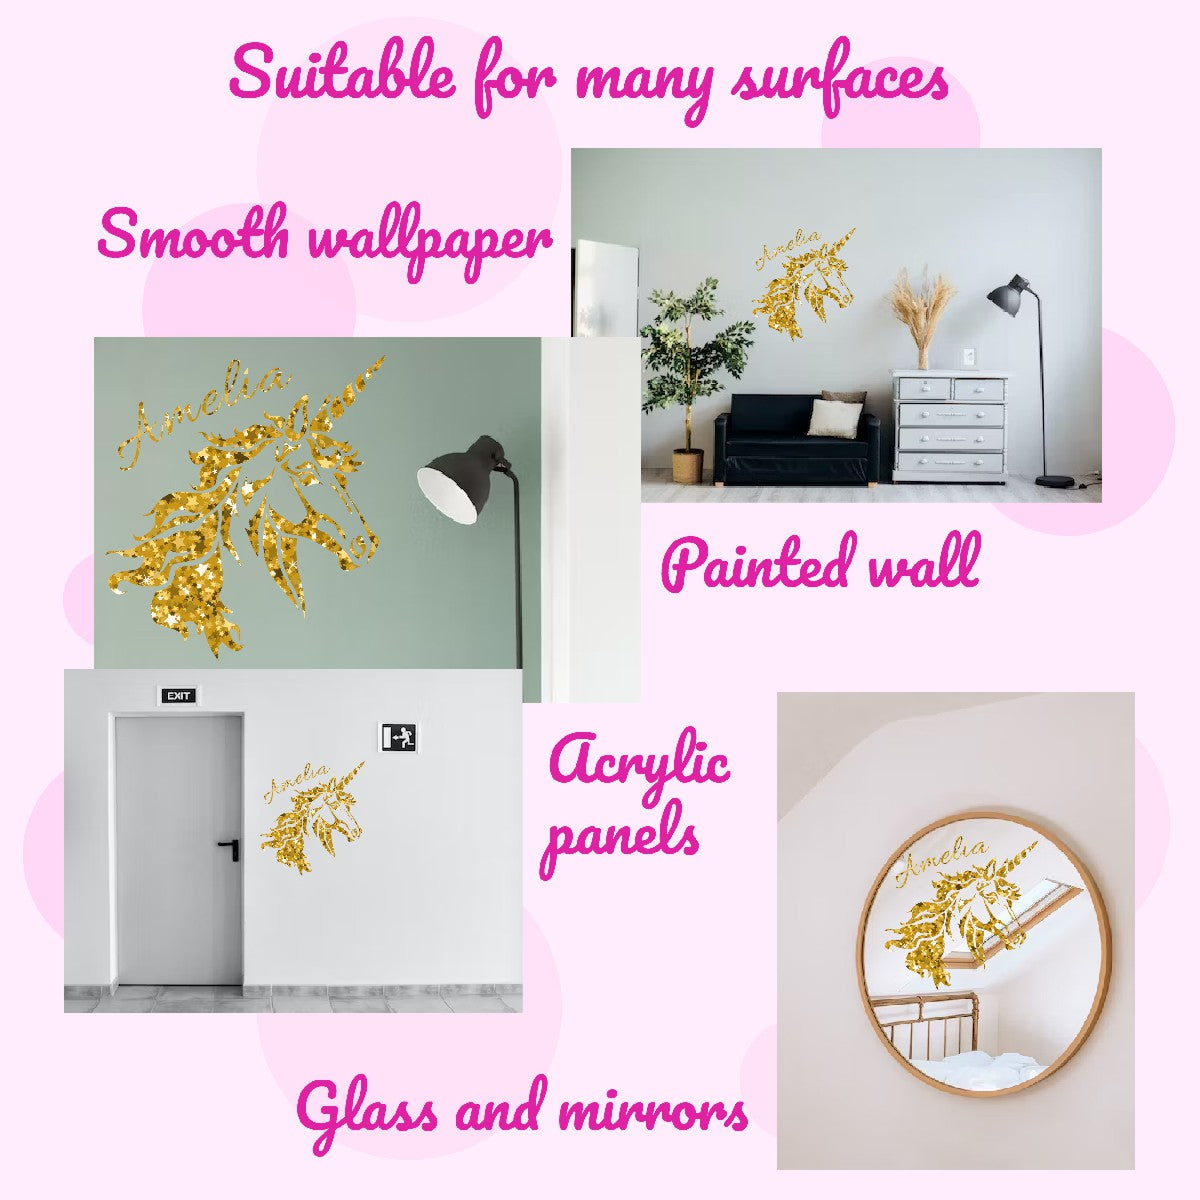 Unicorn Name Wall Decal - Transform Spaces with Personalized Magical Unicorn Stickers with Name  - Adorable Unicorn Wall Sticker for Kid's Room